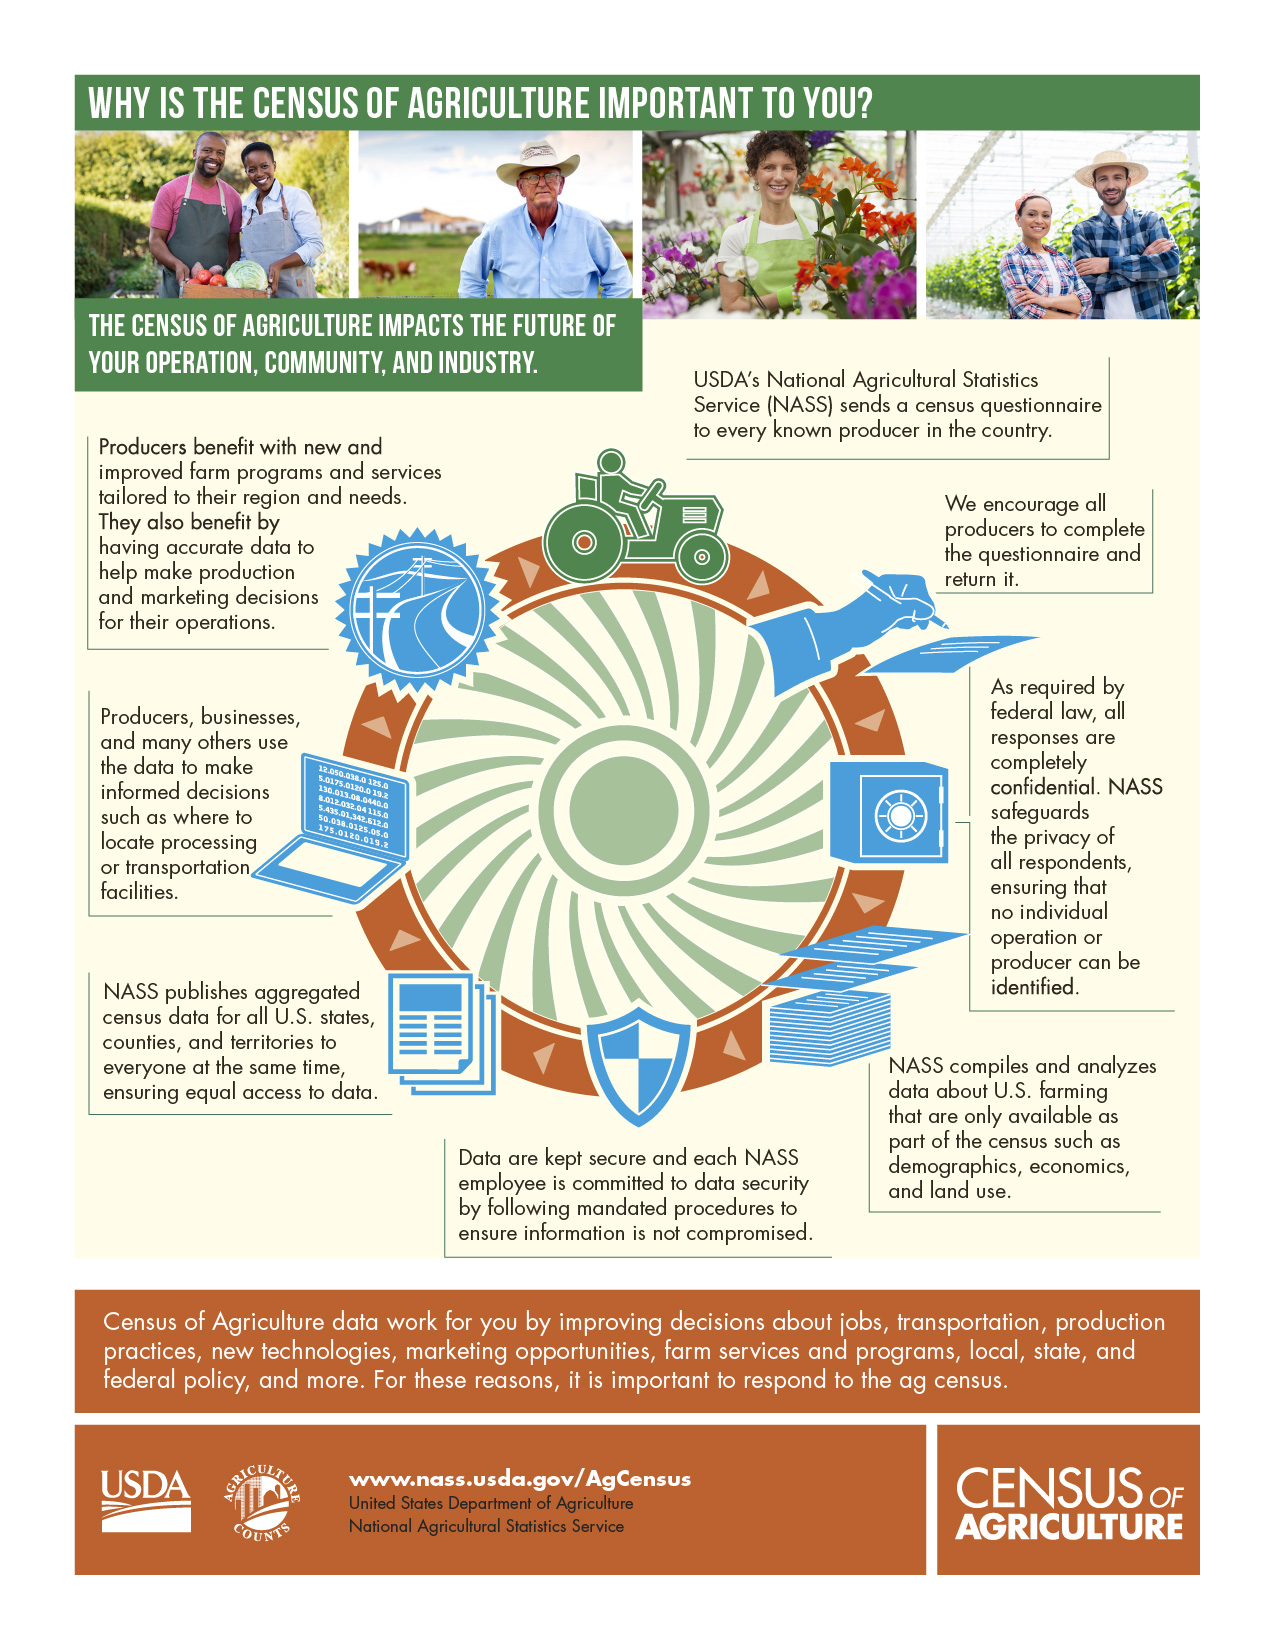 Infographic of the Importance of the Census of Agriculture